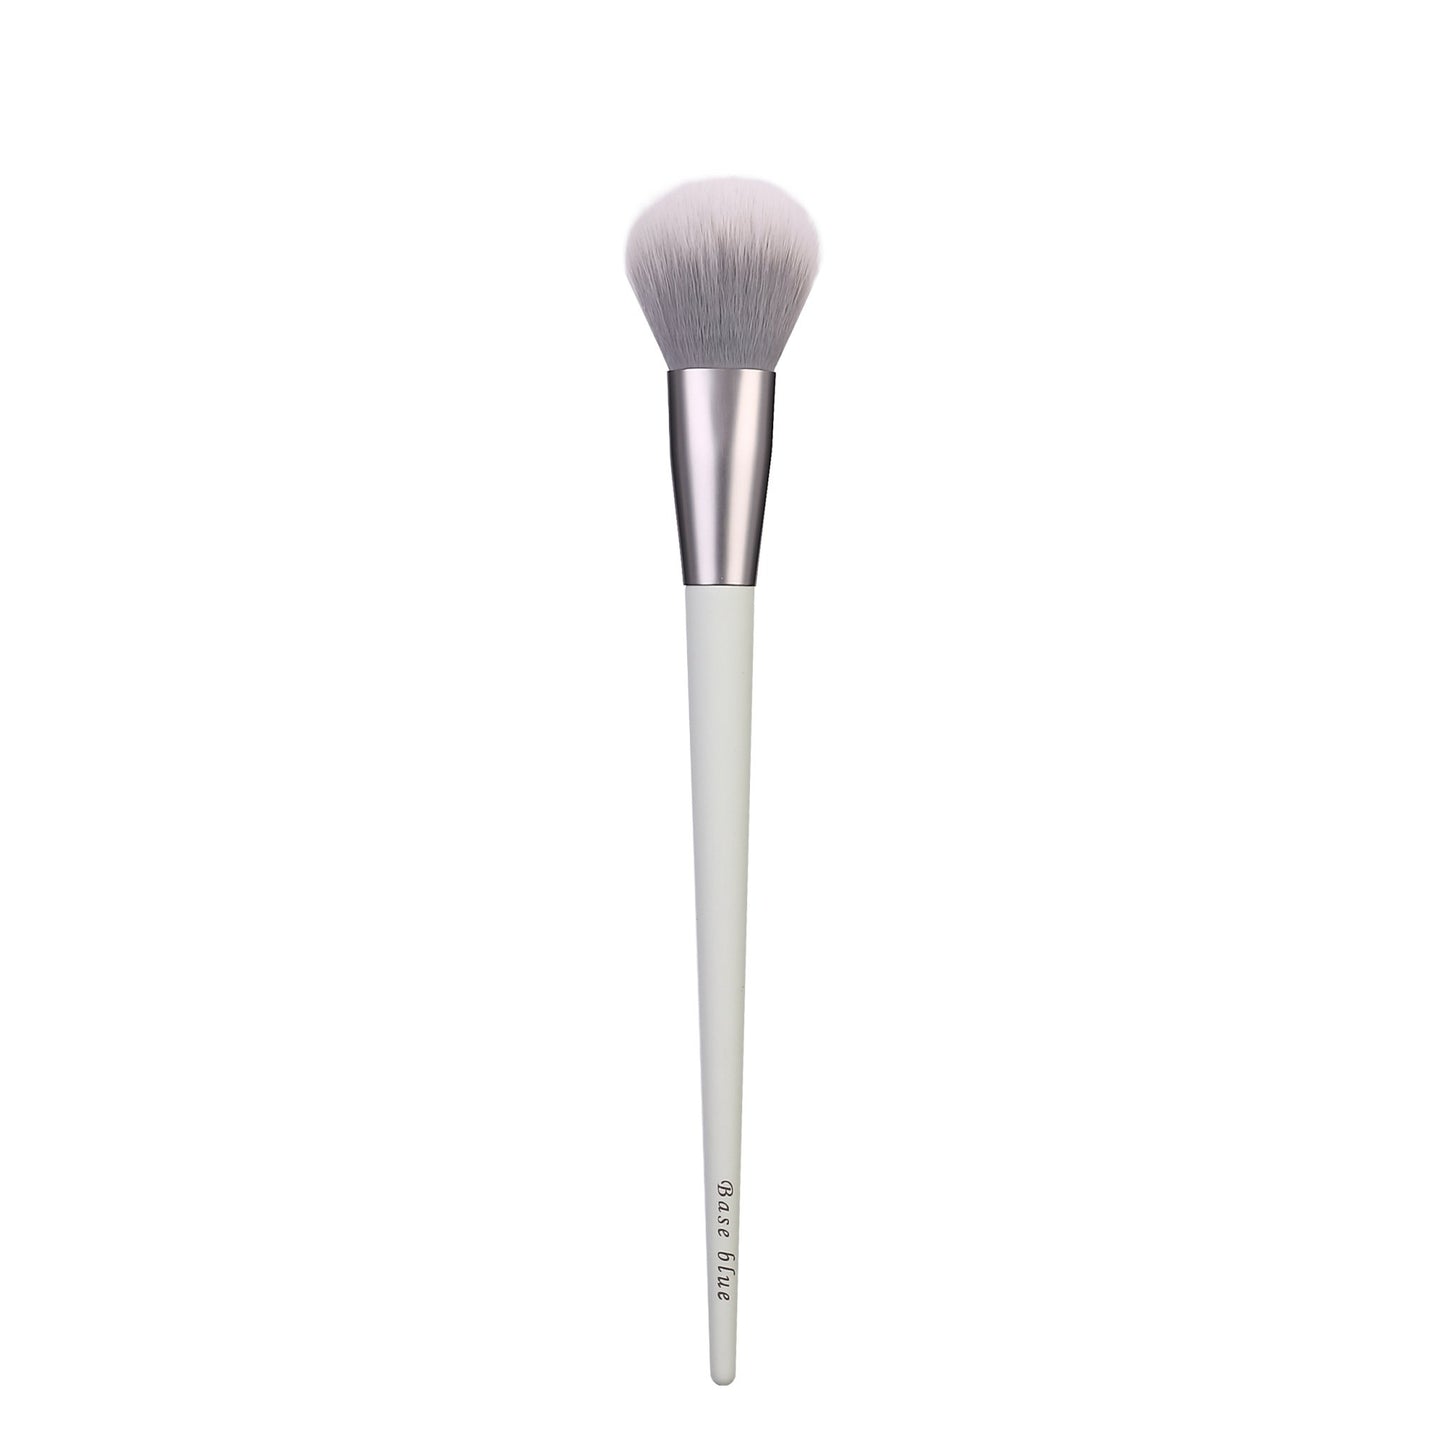 Baseblue Soft Powder Brush --- IN STYLE (case included) - Skin Tone Beauty Products